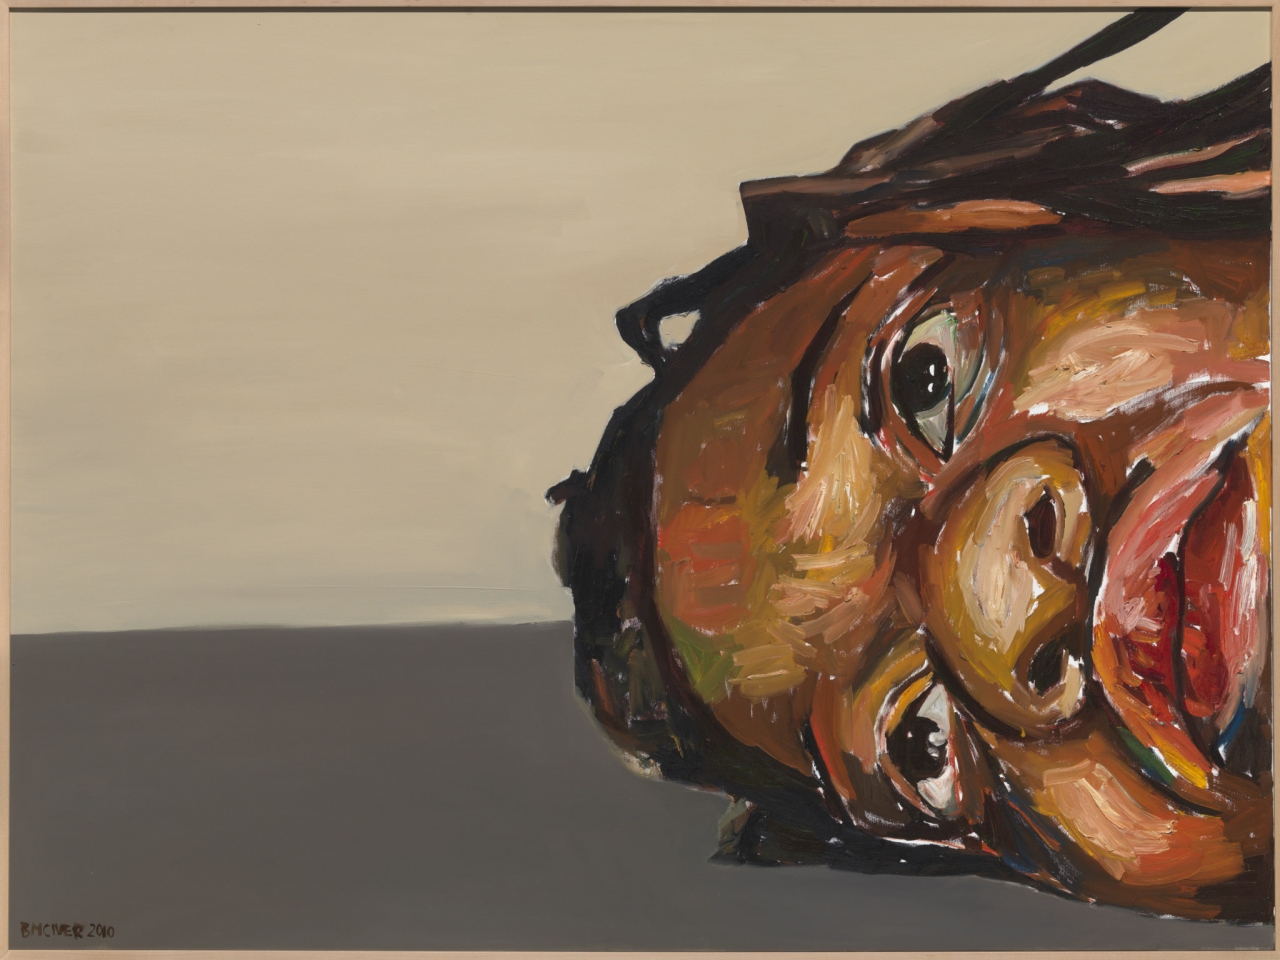 Beverly McIver. 'Depression', 2010, Oil on canvas, Betty Cuningham Gallery, New York City.